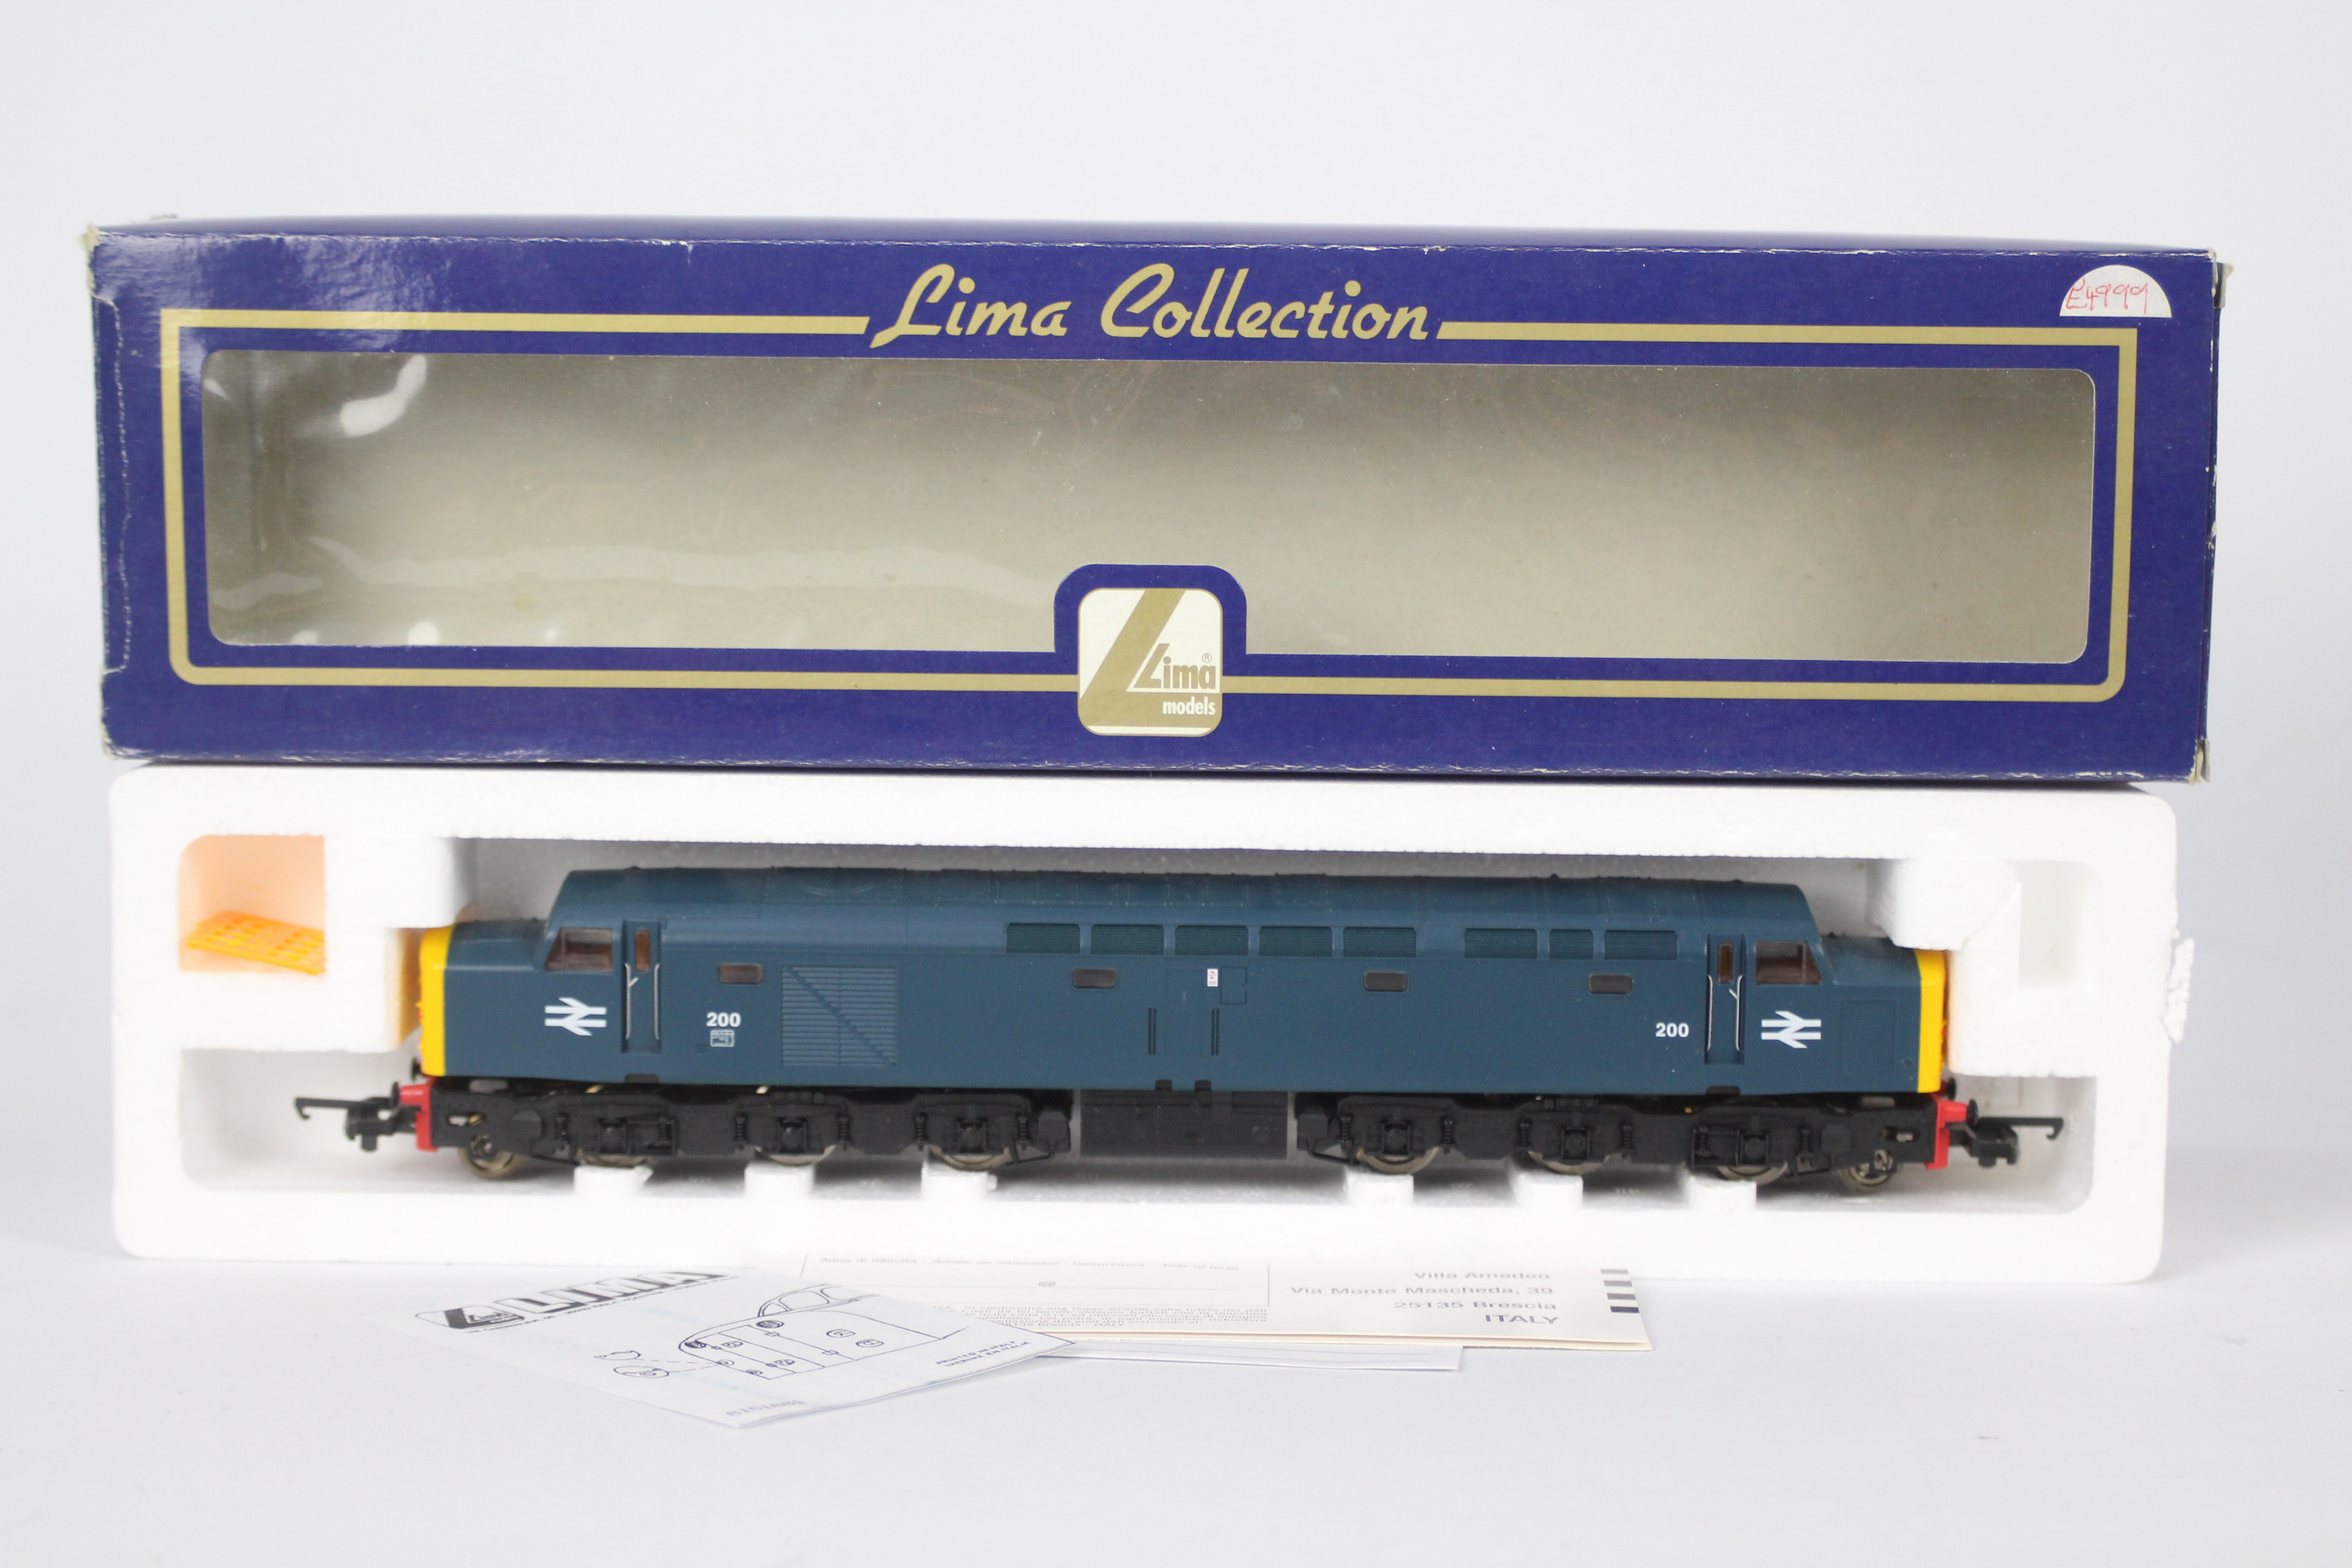 Lima - A OO Gauge Class 40 Diesel loco in British Rail blue livery operating number 200. # L204939.